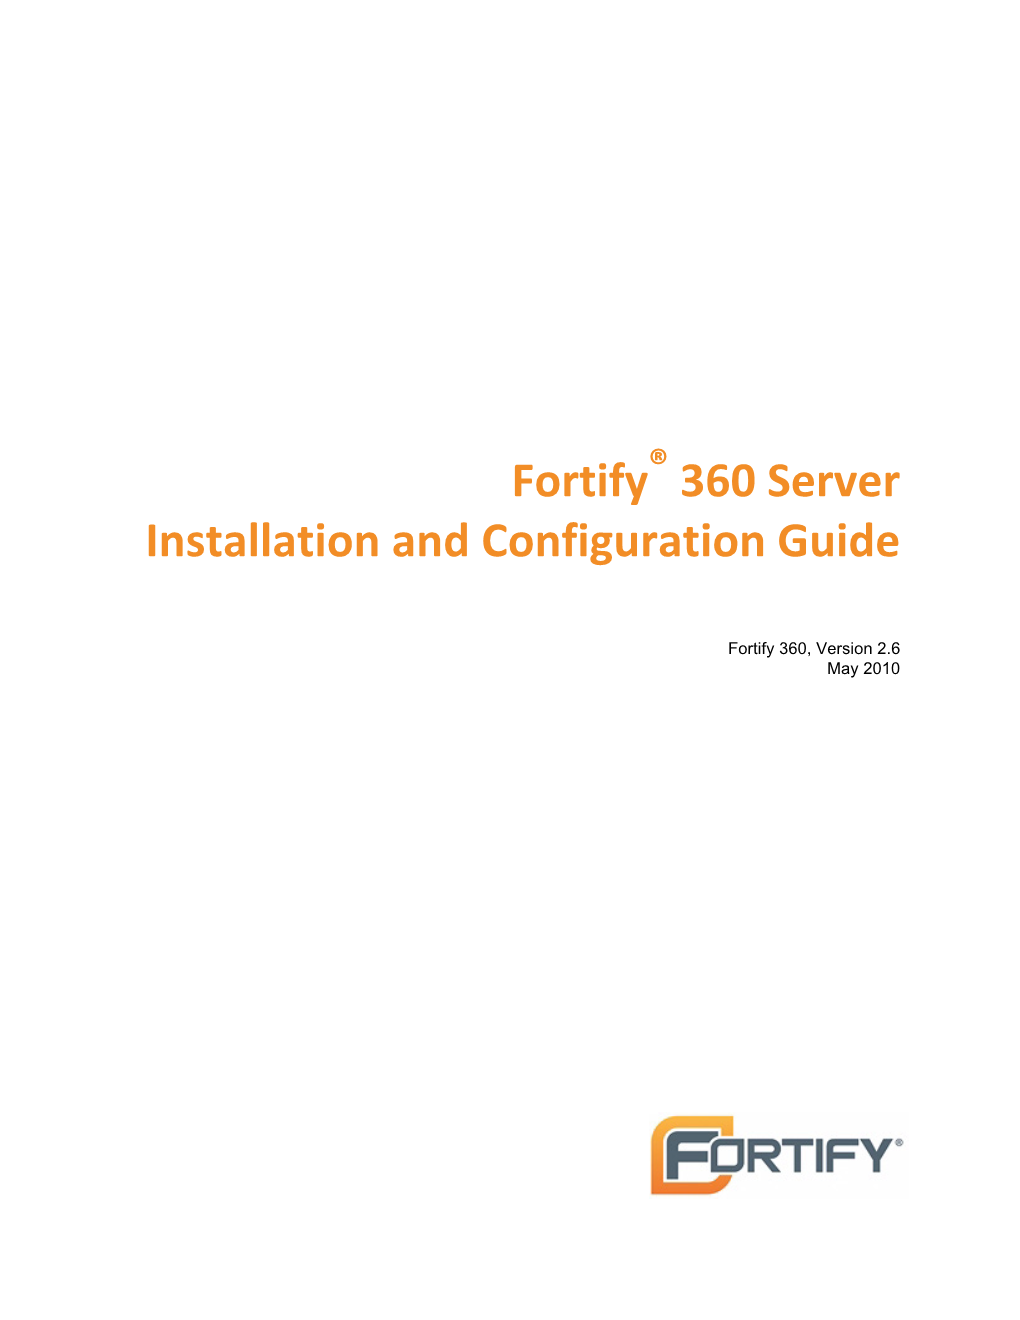 Fortify 360 Server Installation and Configuration Guide